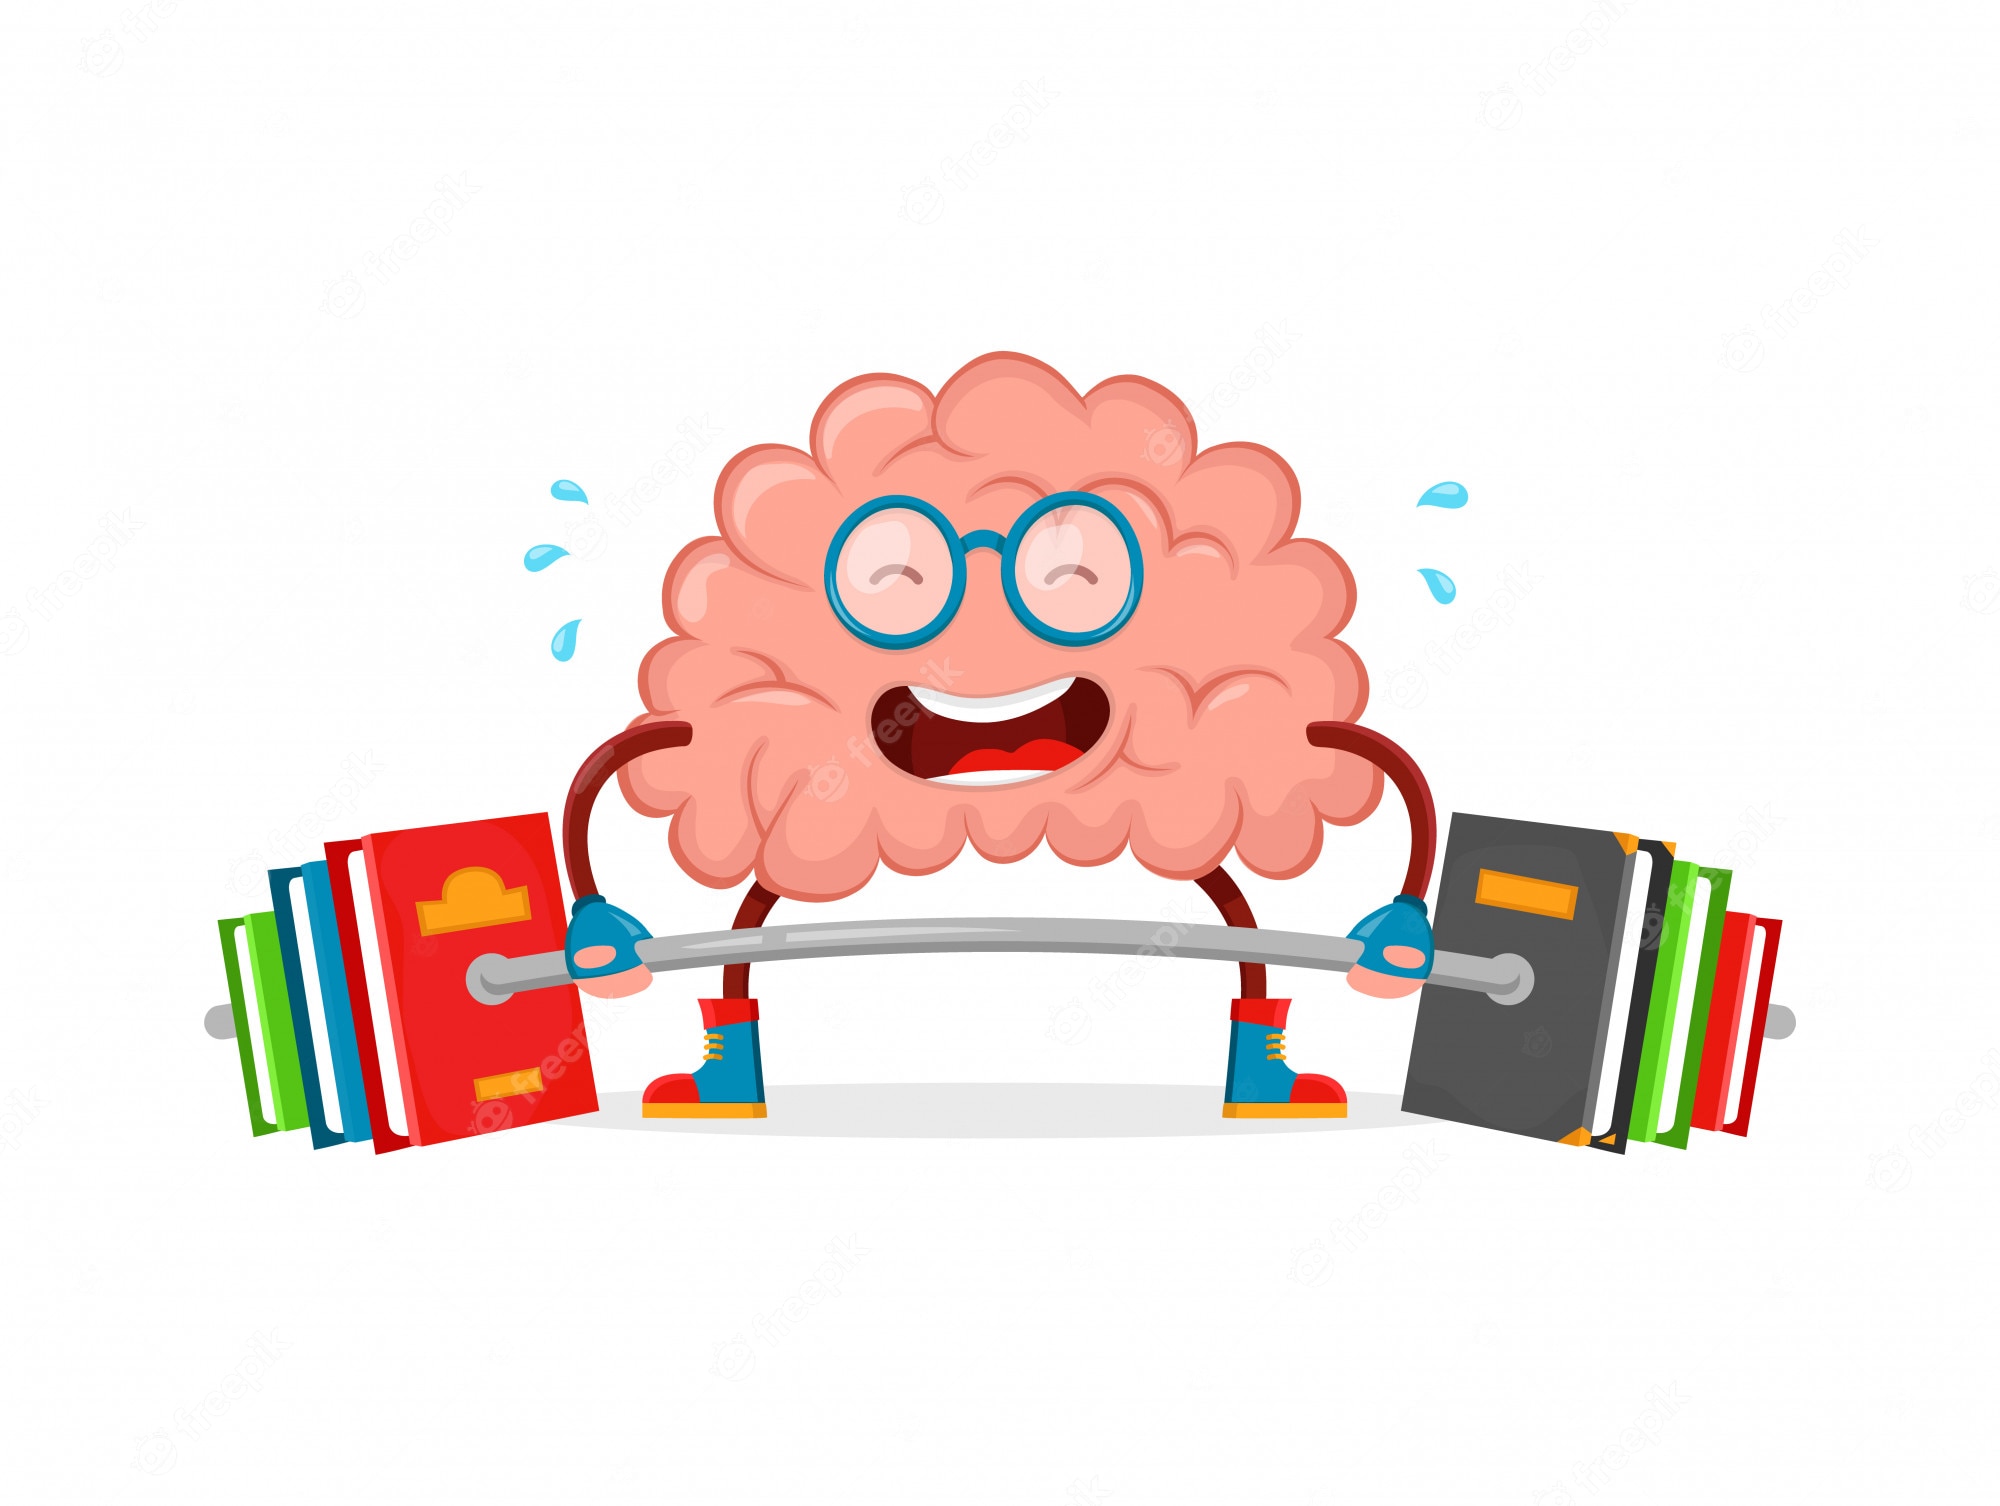 train-your-brain-brain-cartoon-flat-illustration-fun-character-creative-education-science-smart-brain-books-fitness-train-lifts-with-book-barbell-isolated-white_92289-451